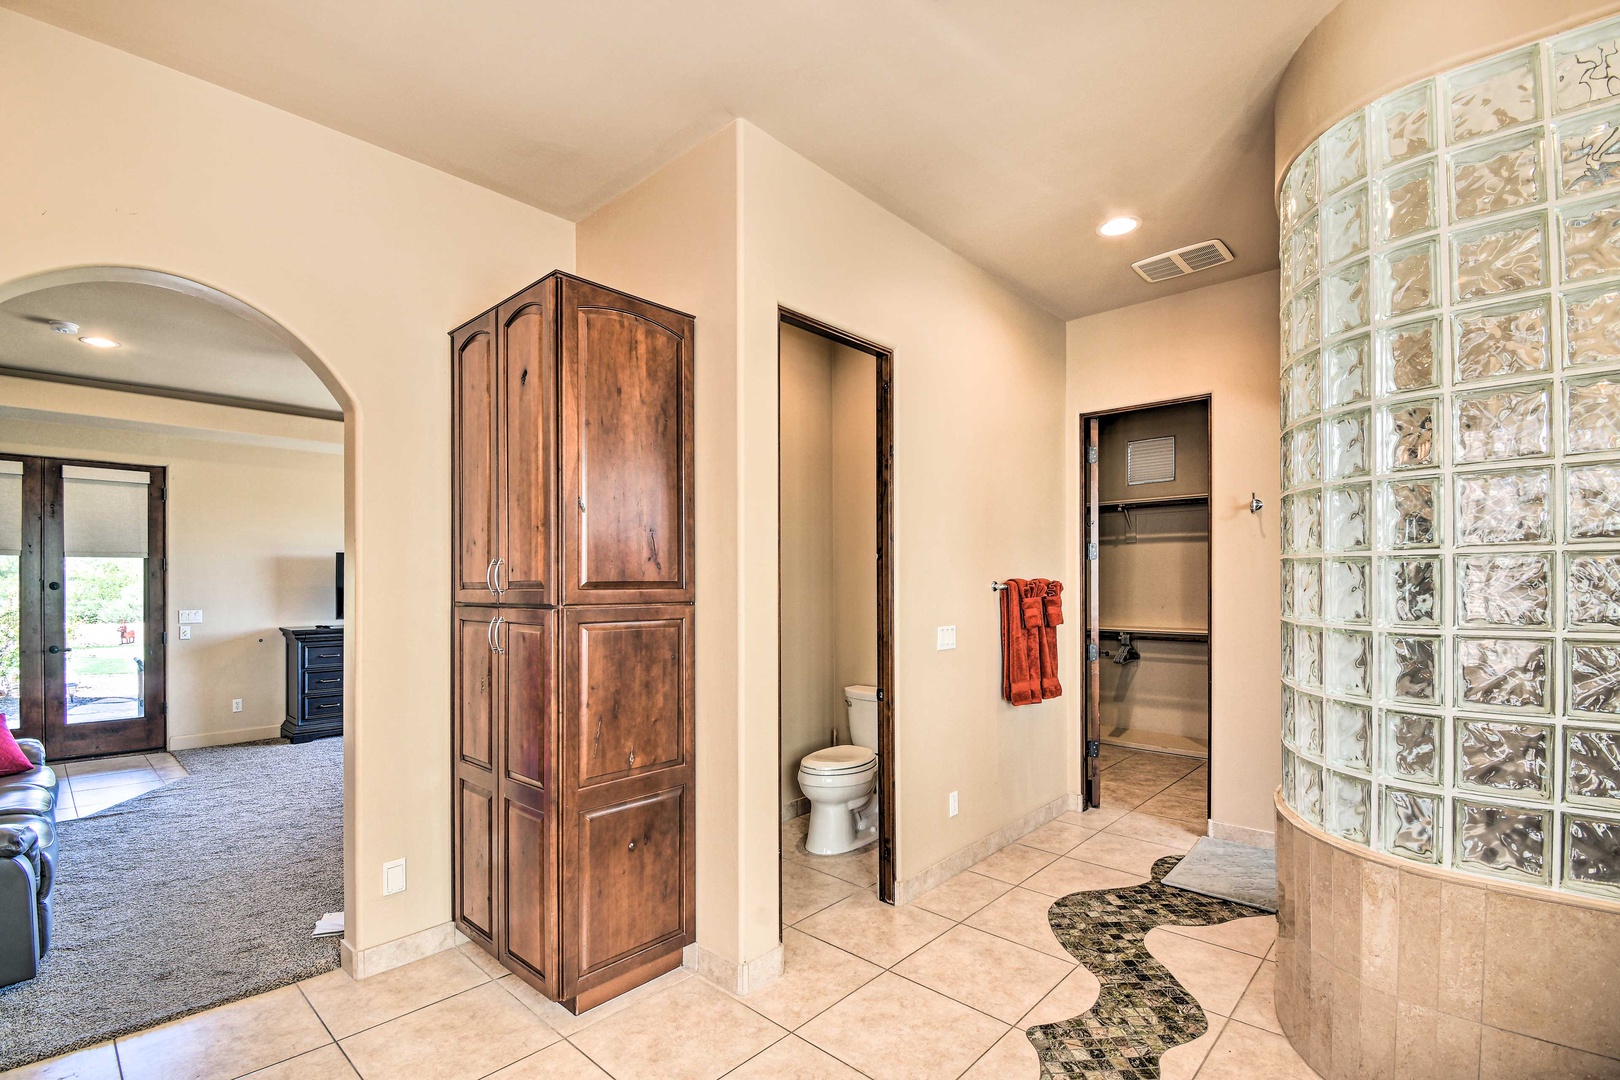 The primary ensuite offers dual vanities & separated snail shower/soaking tub